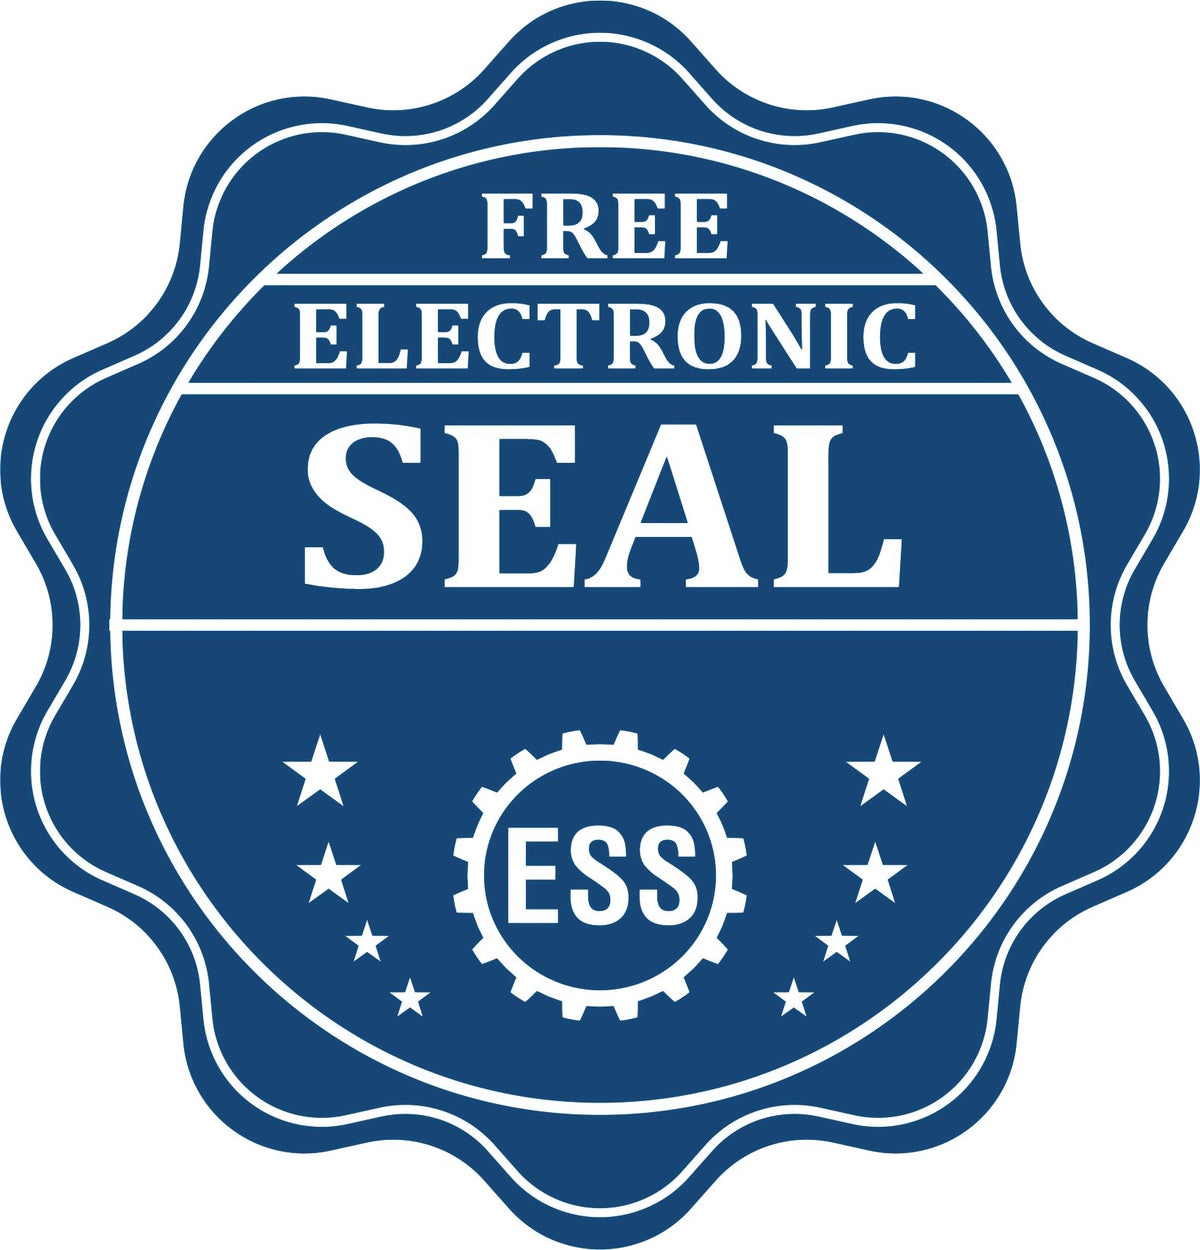 A badge showing a free electronic seal for the Gift Montana Landscape Architect Seal with stars and the ESS gear on the emblem.